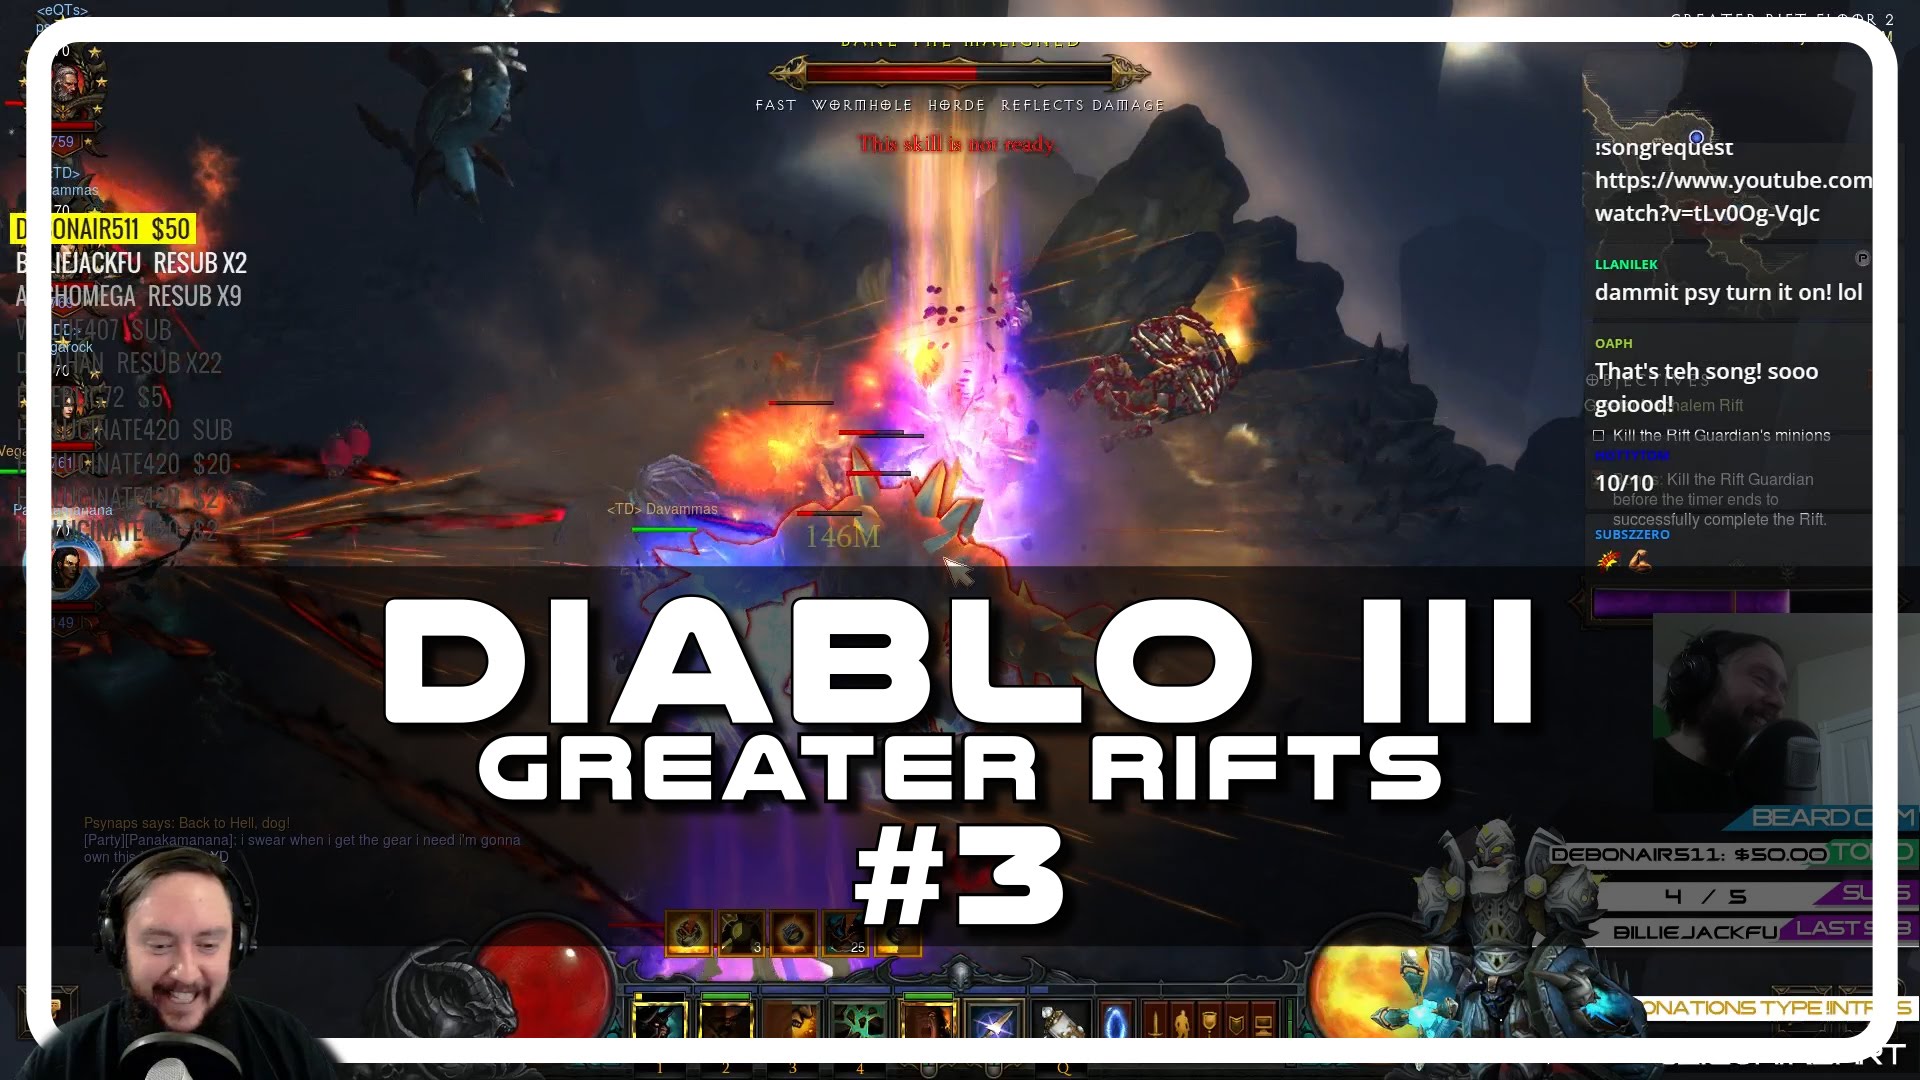 Diablo III Greater Rifts with Psynaps #03